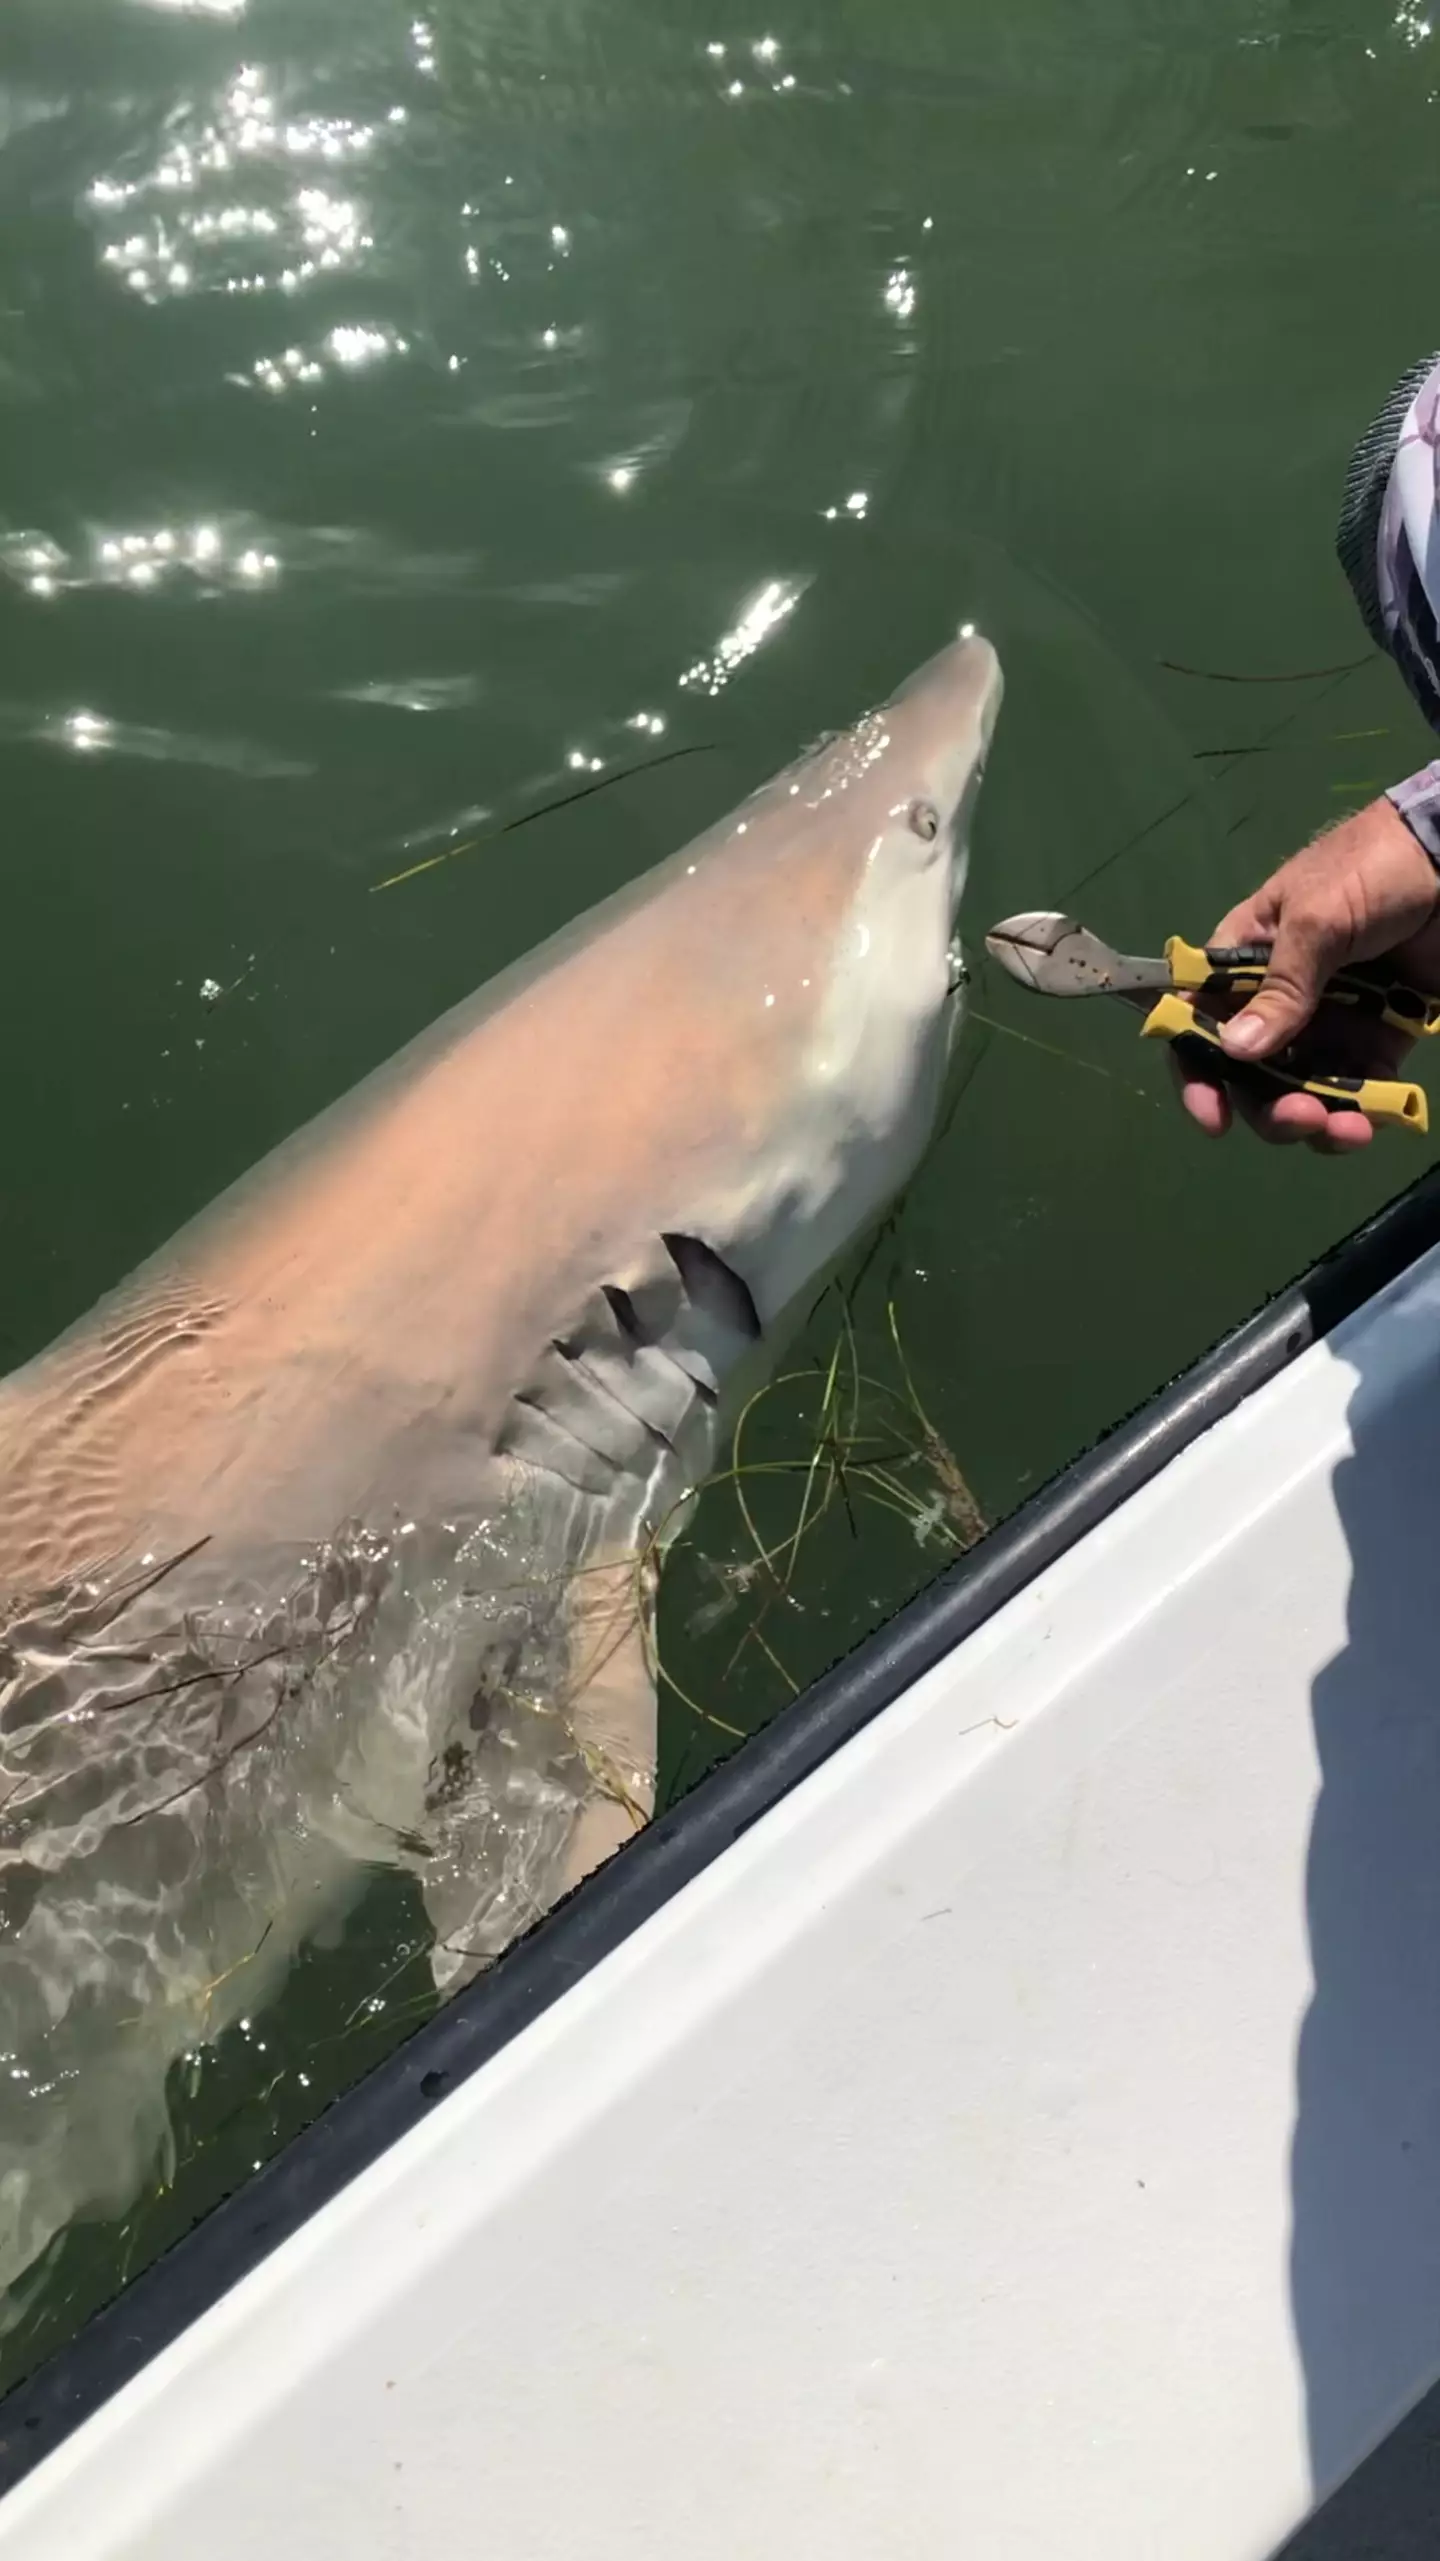 Dave Perkins has caught and released nearly 1,000 sharks in his lifetime.